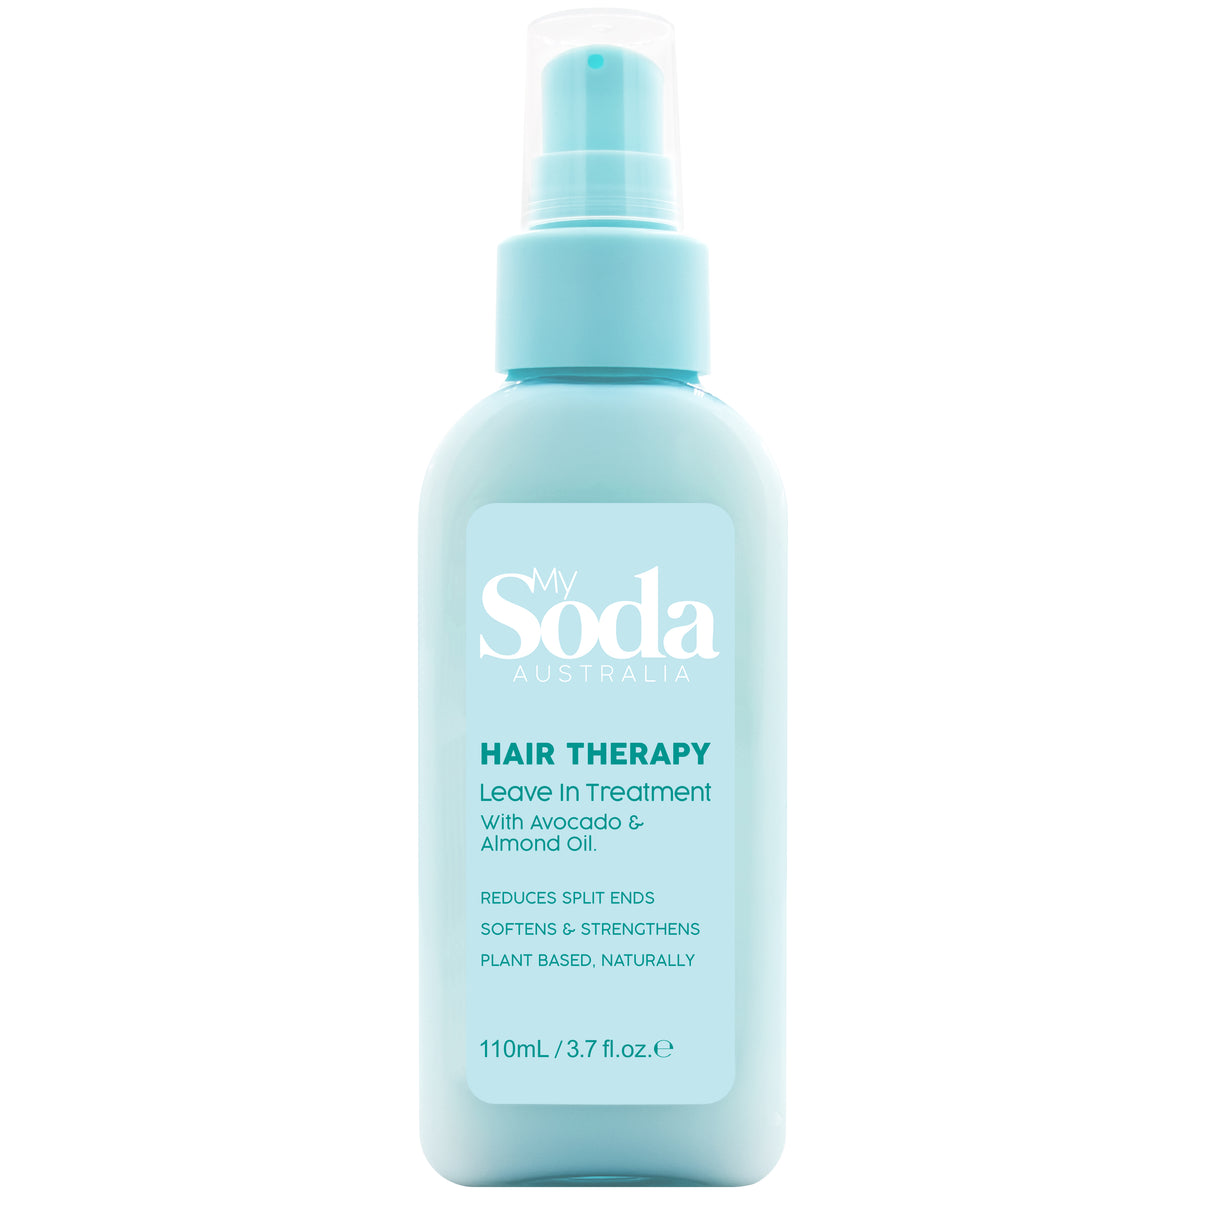 My Soda Hair Therapy Leave In Treatment 110ml